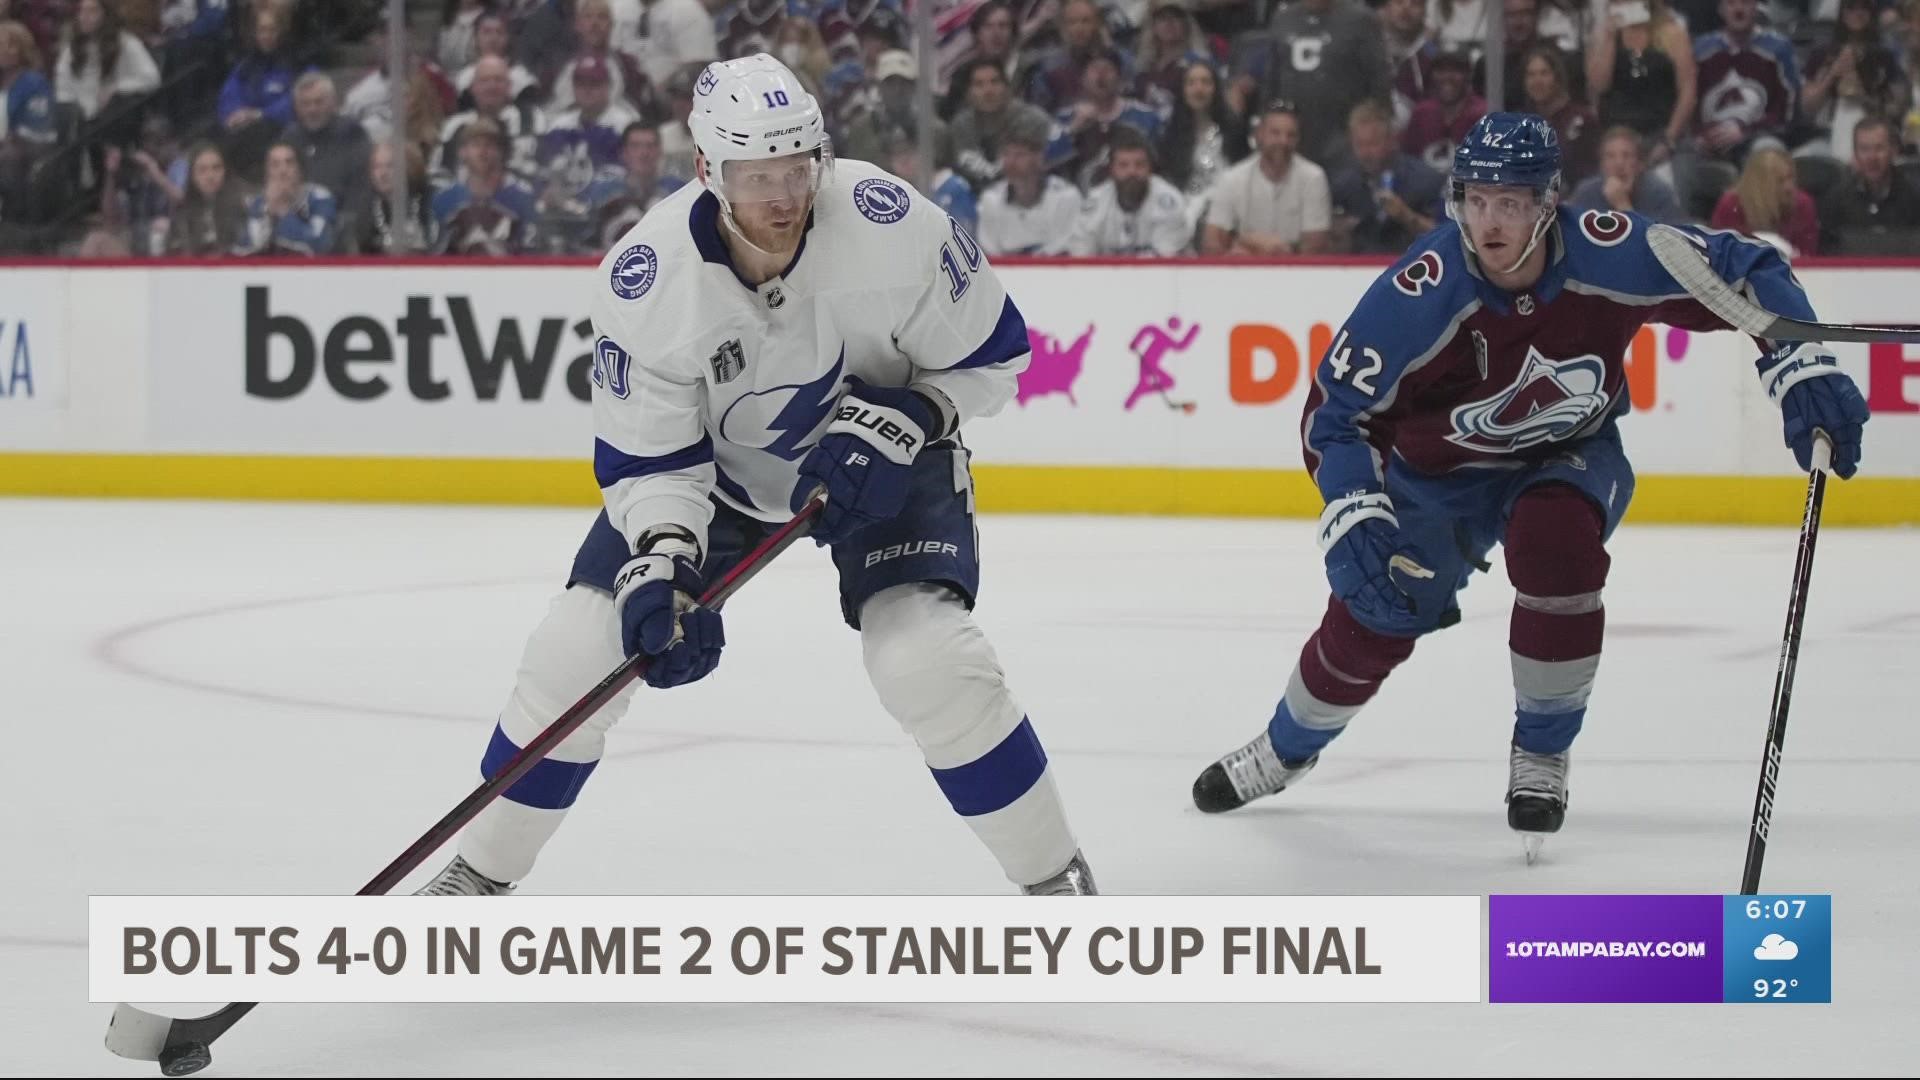 The defending champions are trailing the Colorado Avalanche. A win on Saturday would tie the Stanley Cup Final before the series moves to Amalie Arena next week.